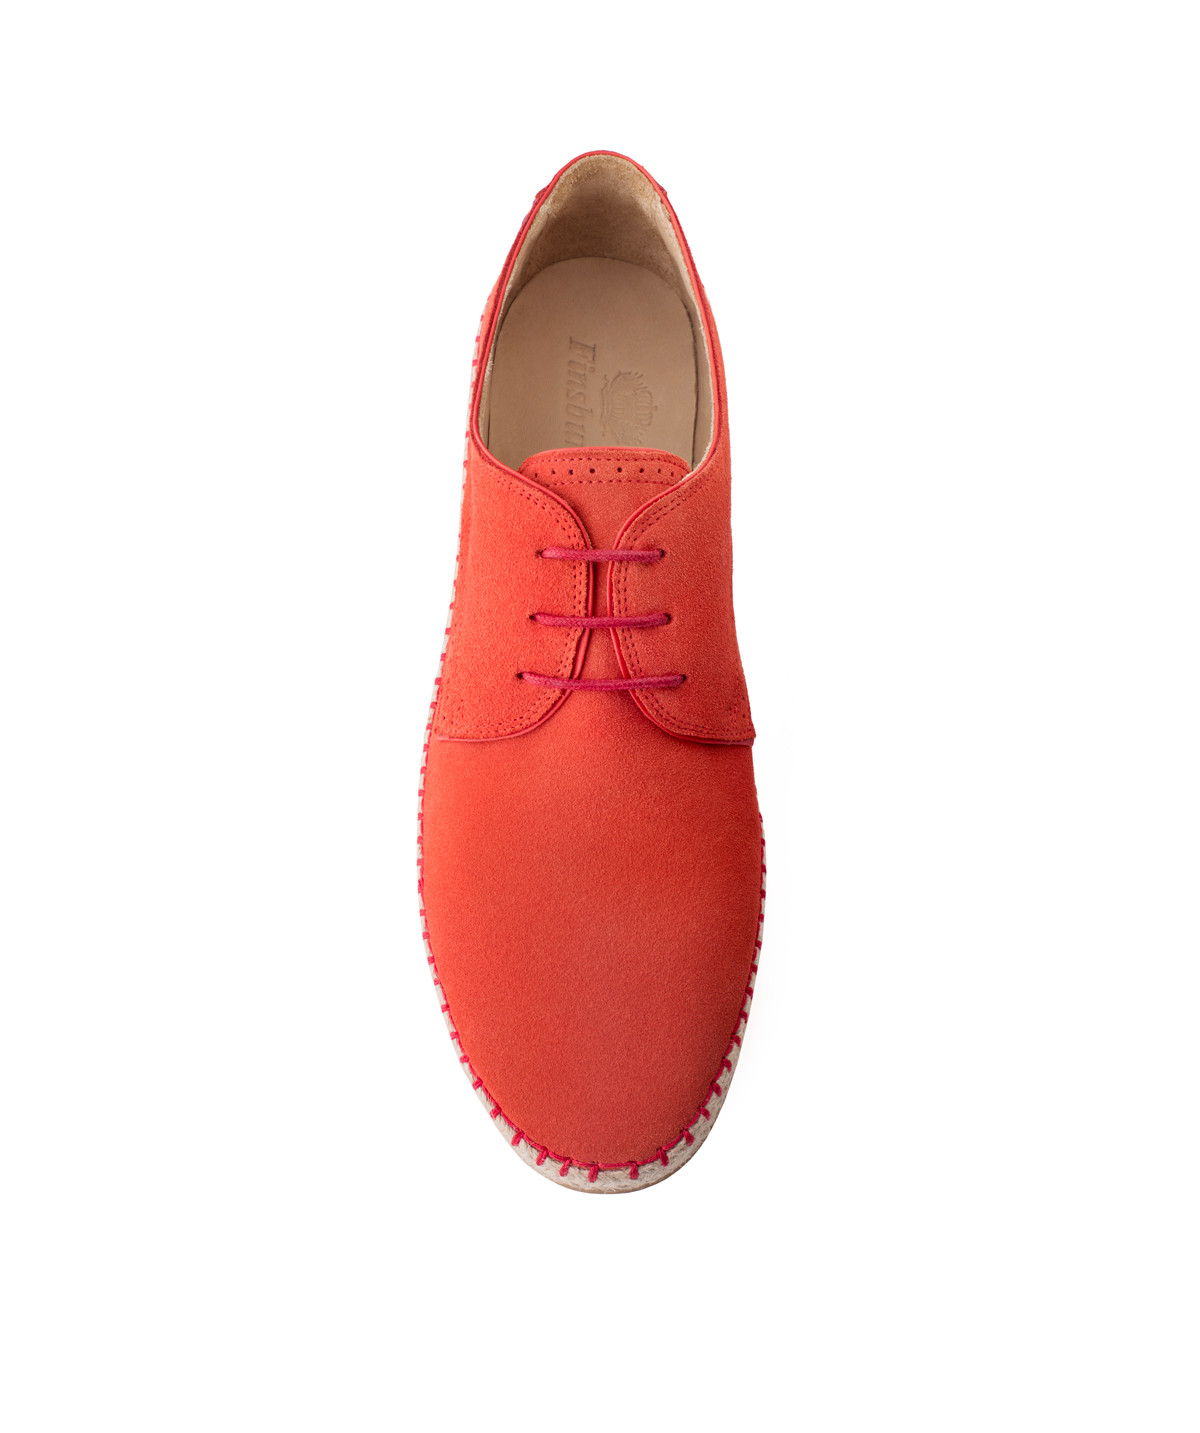 Oxford Shoes California Red Suede - Finsbury Shoes